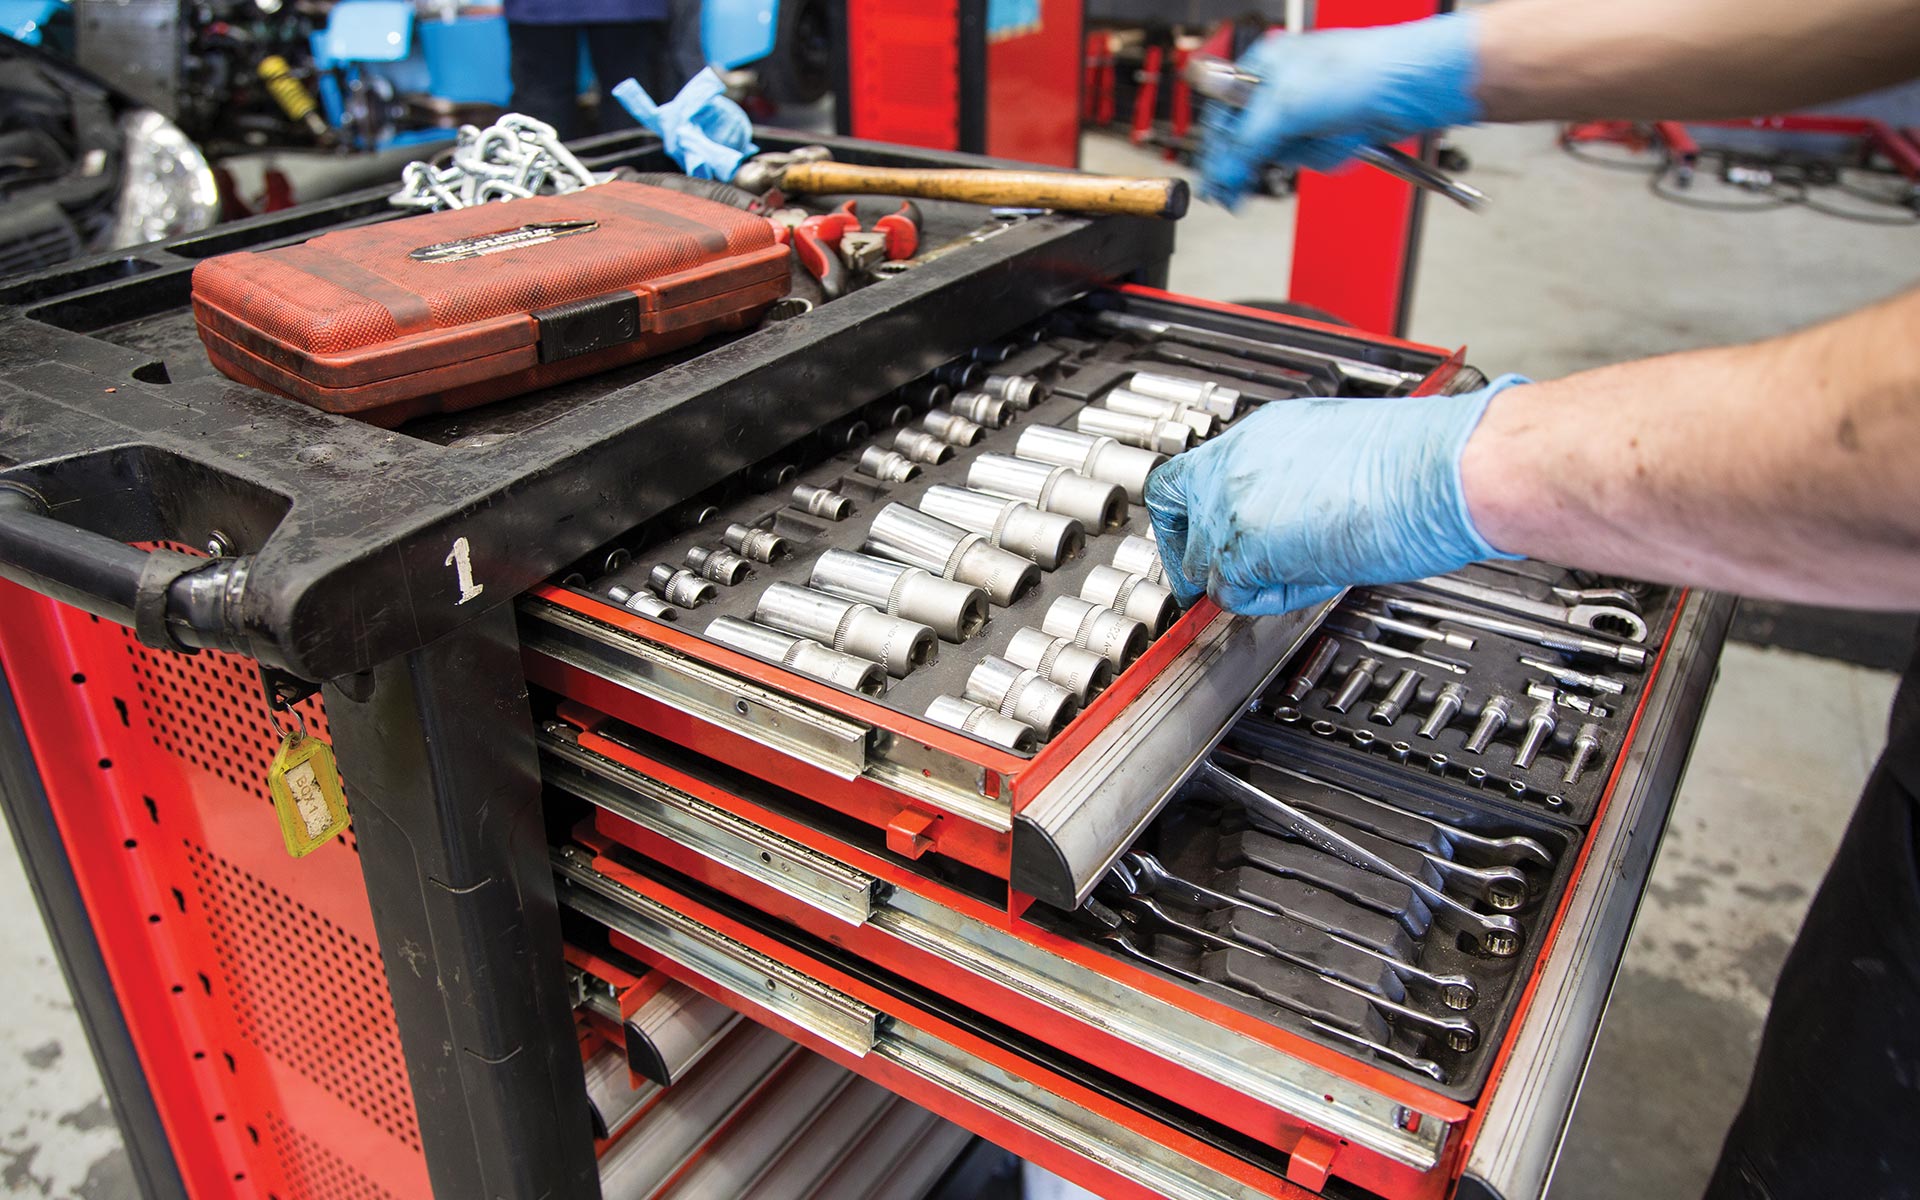 Our Automotive Training Centre is kitted out with industry standard snap on tools to help you perfect your skills.